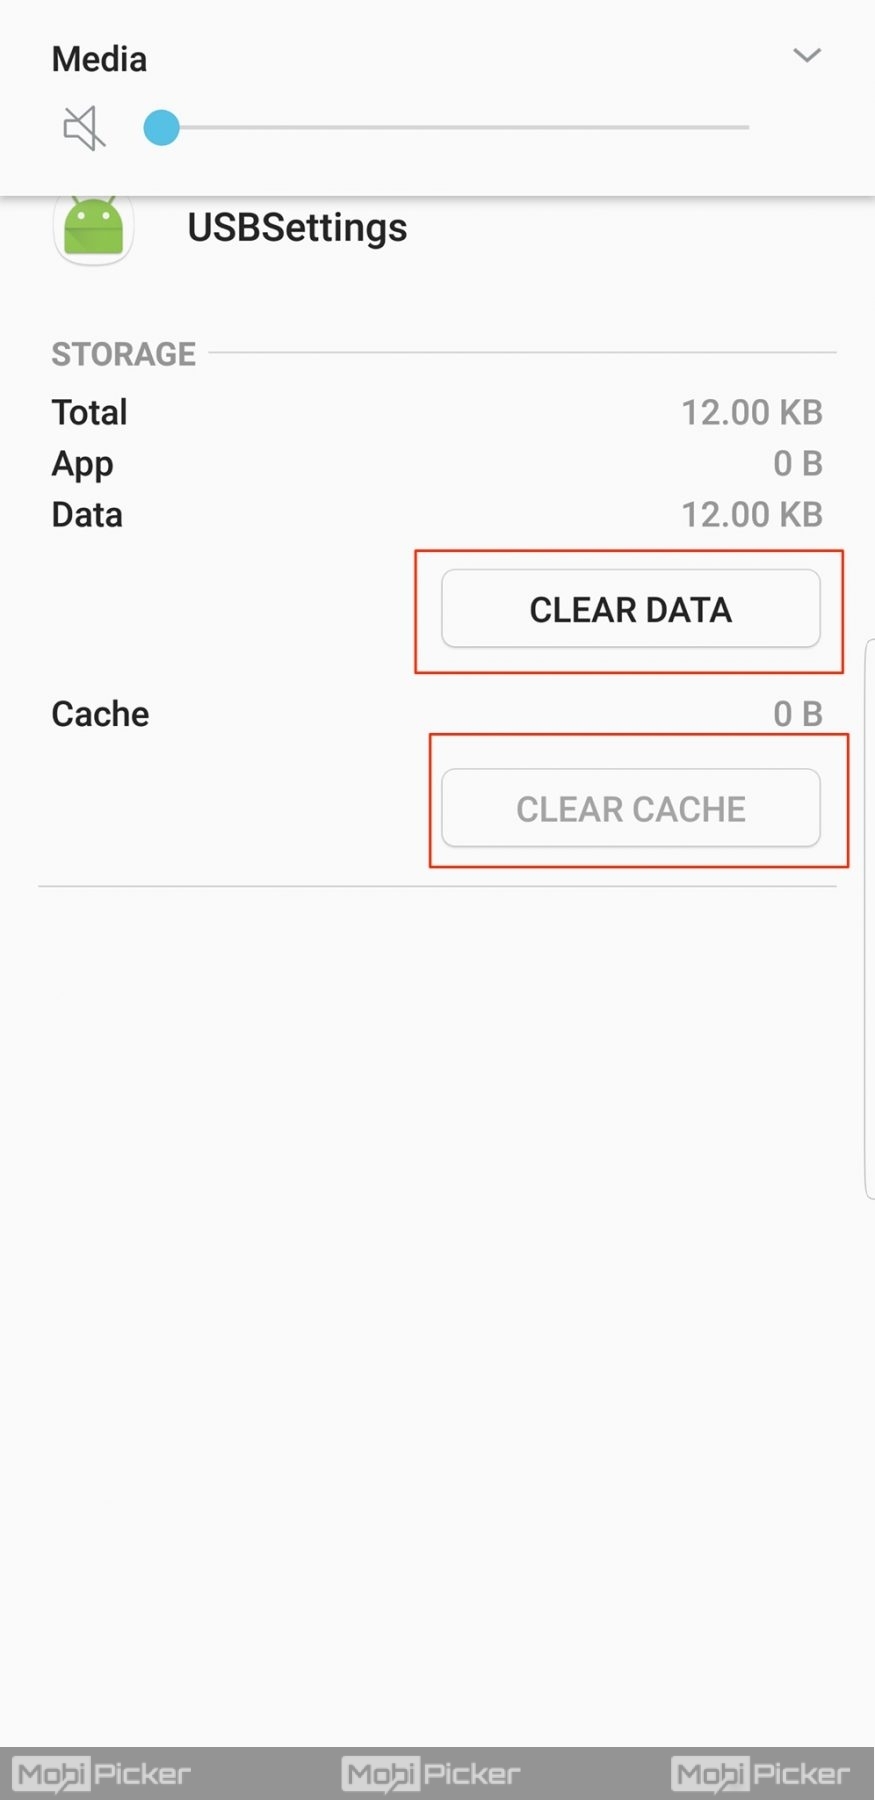 [Fix] Galaxy S8: Moisture Detected in Charging Port Error | DeviceDaily.com